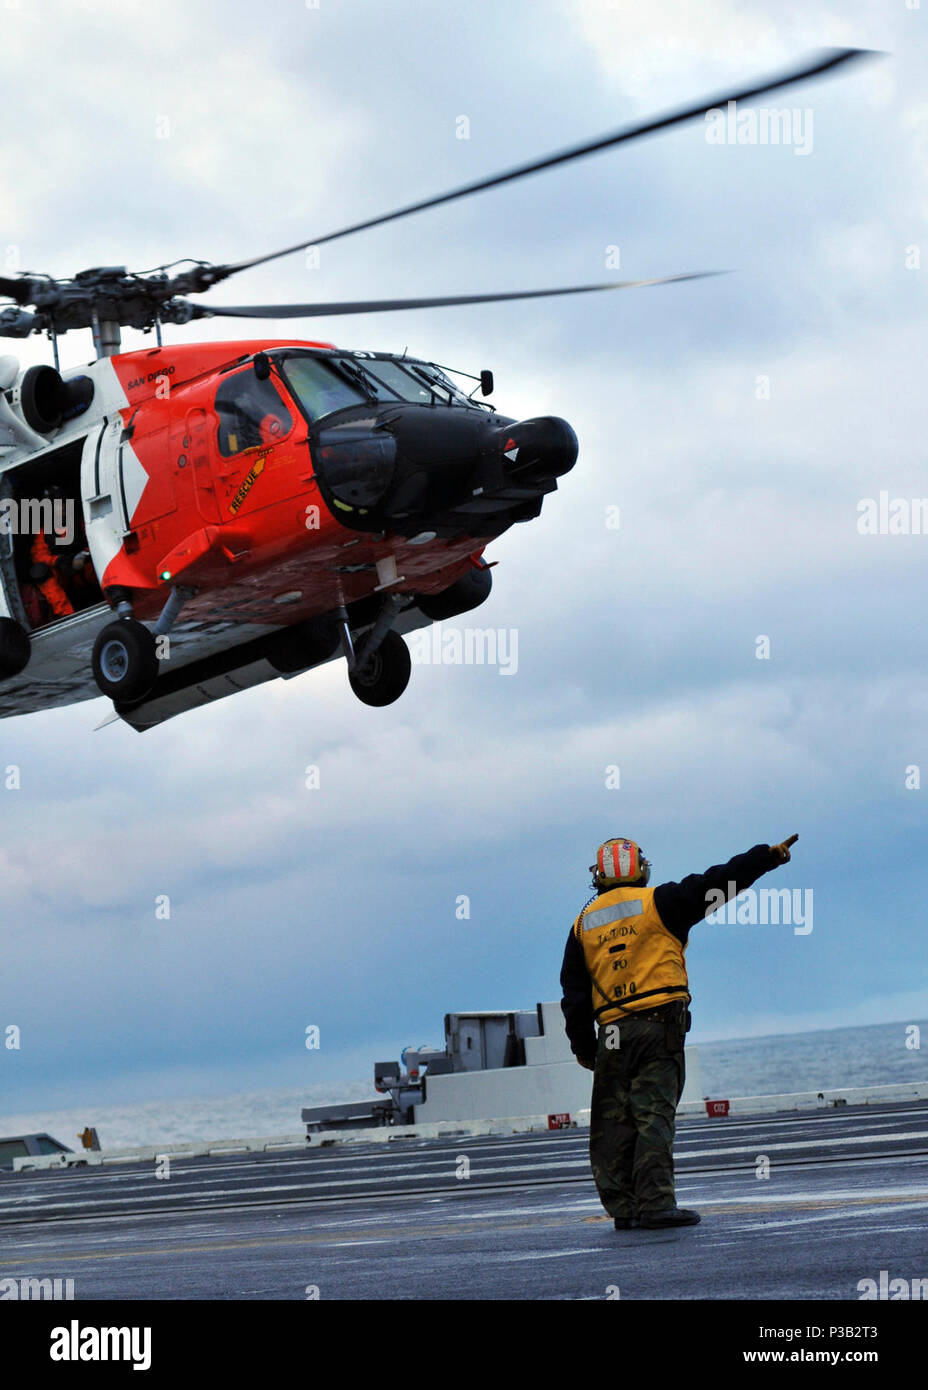 OCEAN (Dec. 15, 2008) Aviation Boatswain's Mate (Handling) 1st Class Jerry Pitts, from Santa Maria, Calif., directs a U.S. Coast Guard HH-60 helicopter for launch from the flight deck of the aircraft carrier USS Abraham Lincoln (CVN 72). The helicopter participated in the evacuation of an injured merchant Sailor to Abraham Lincoln. The sailor was medically stabilized and flown to San Francisco for treatment. Lincoln is underway conducting training and carrier qualifications. Stock Photo